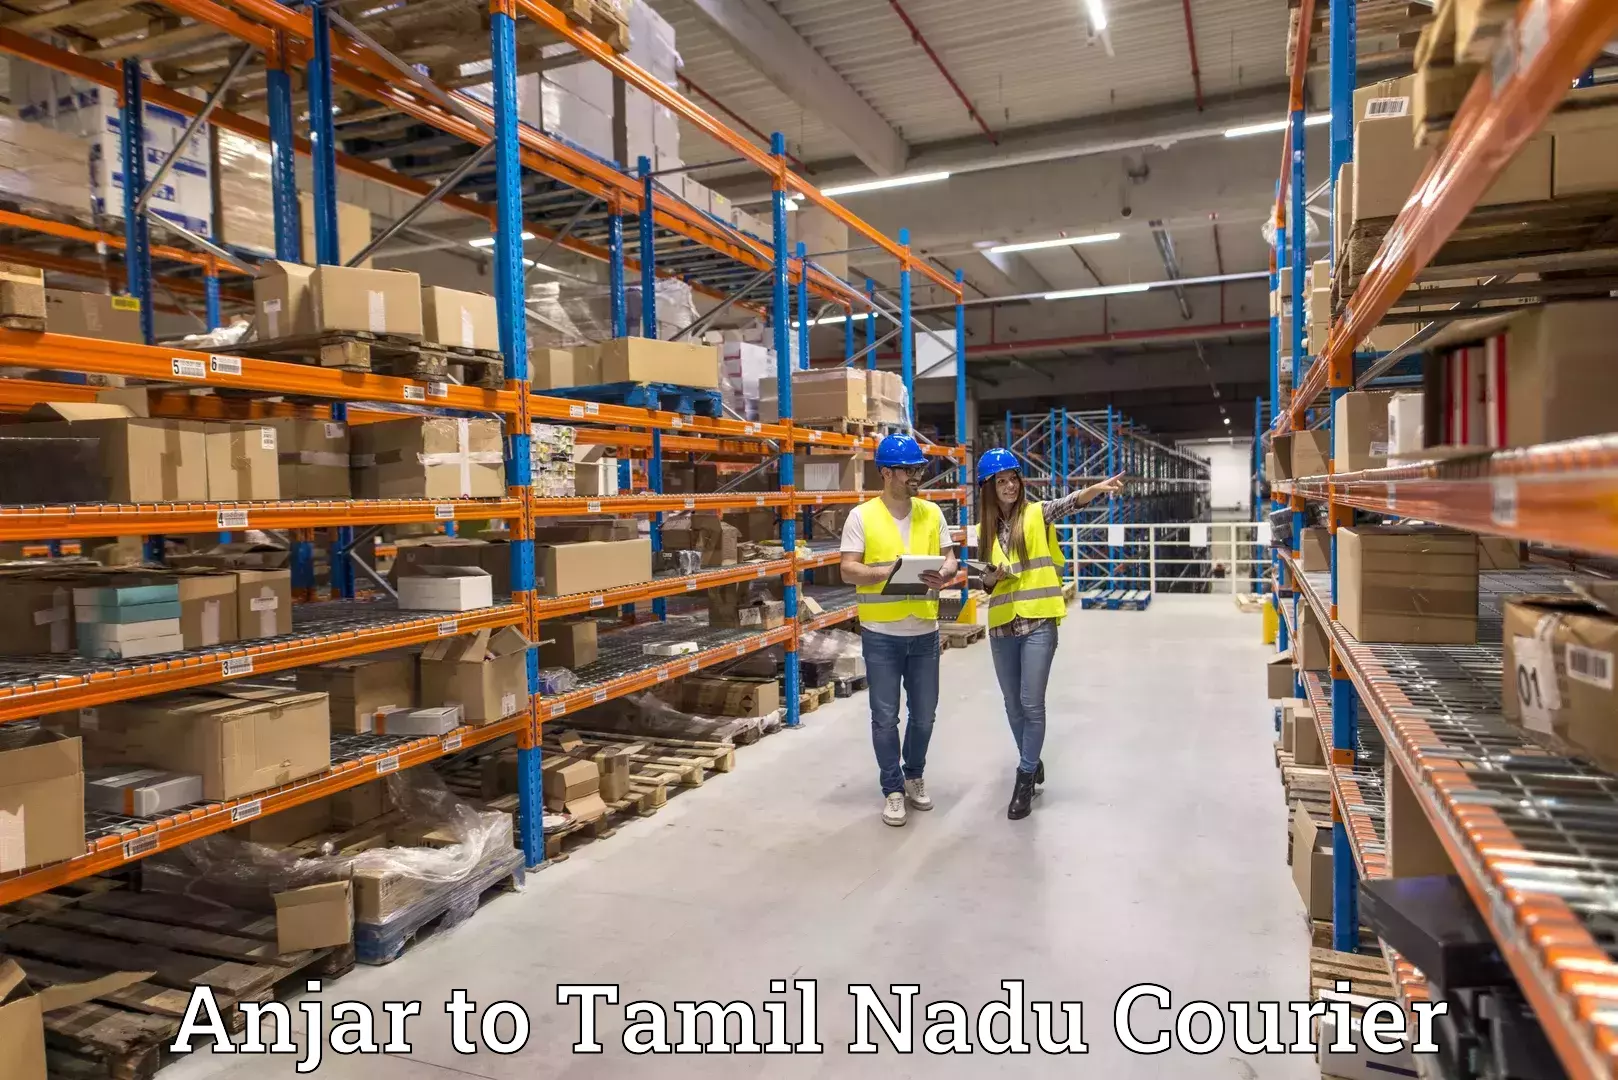 Flexible delivery scheduling Anjar to Tenkasi